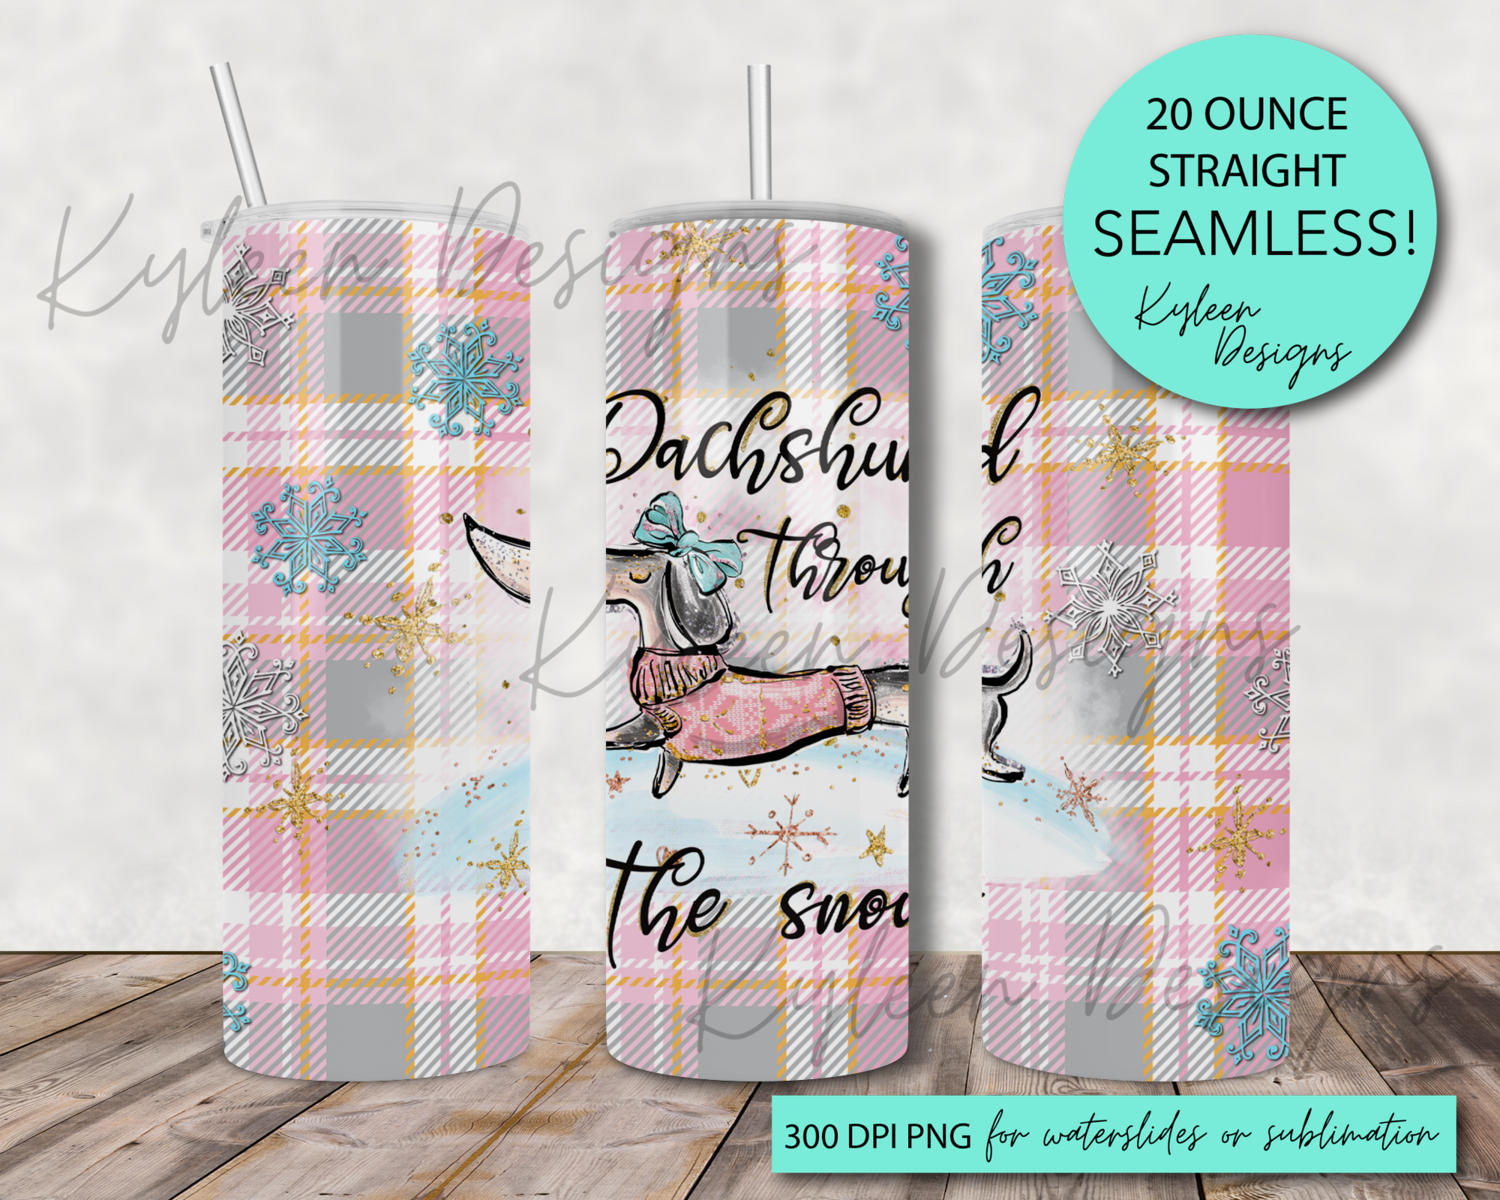 20 ounce Dachshund Through the Snow wrap for sublimation, waterslide High res PNG digital file